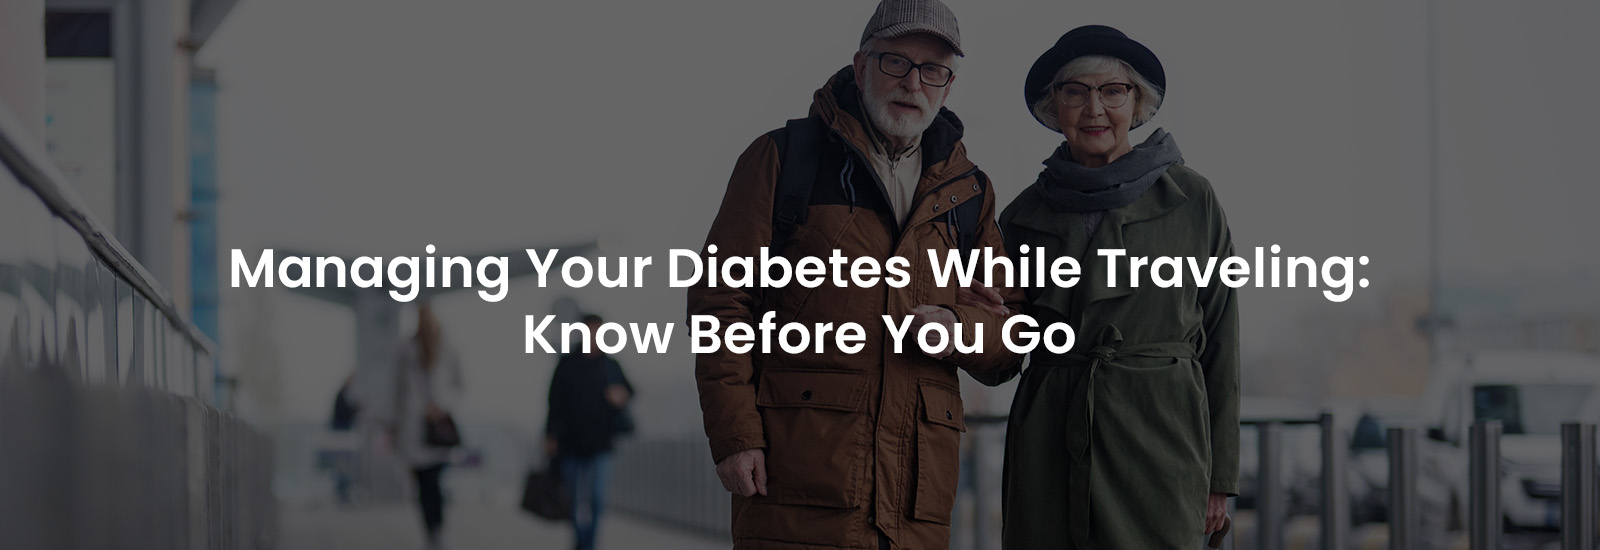 Managing Your Diabetes While Travelling | Banner Image